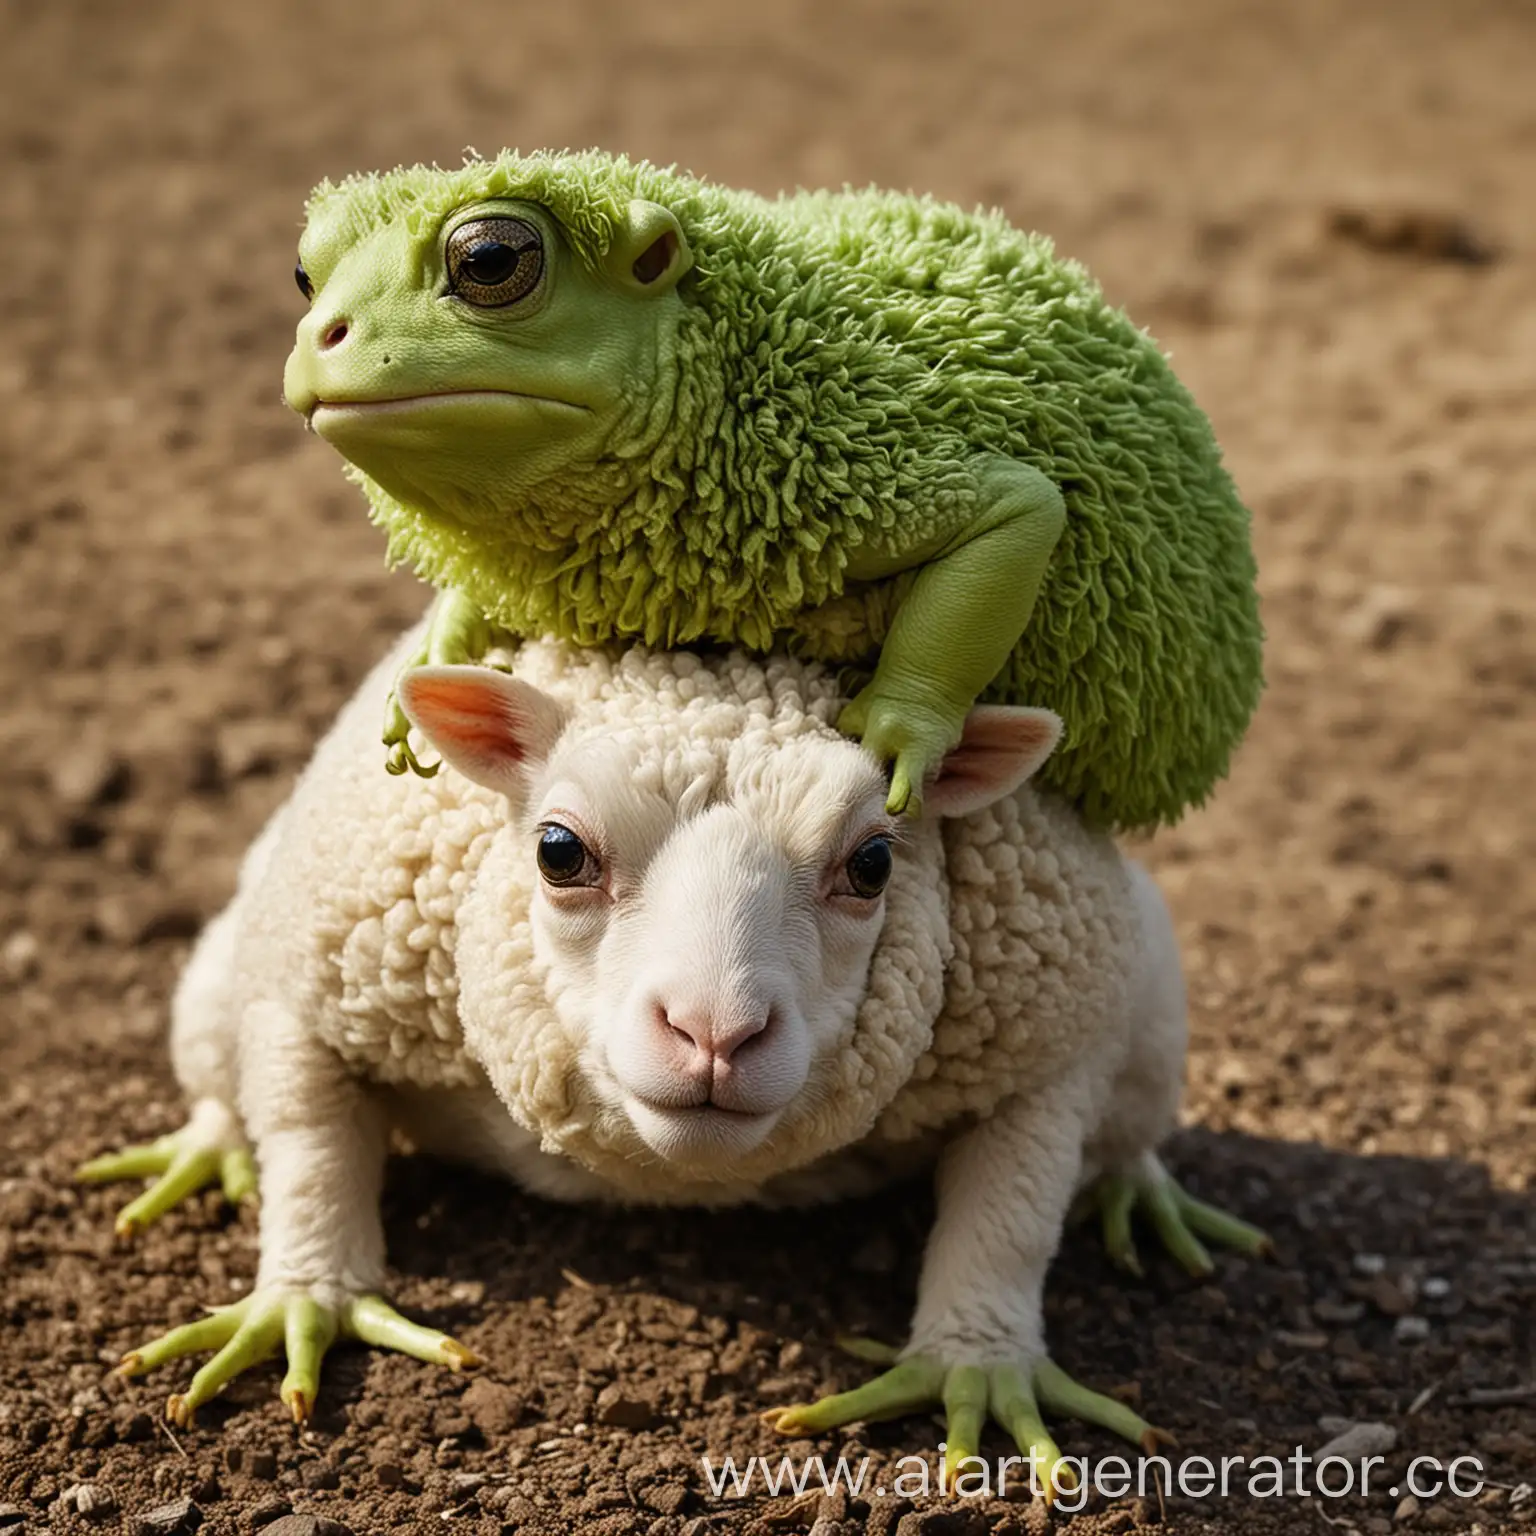 Hybrid-Creature-with-Sheep-and-Frog-Features